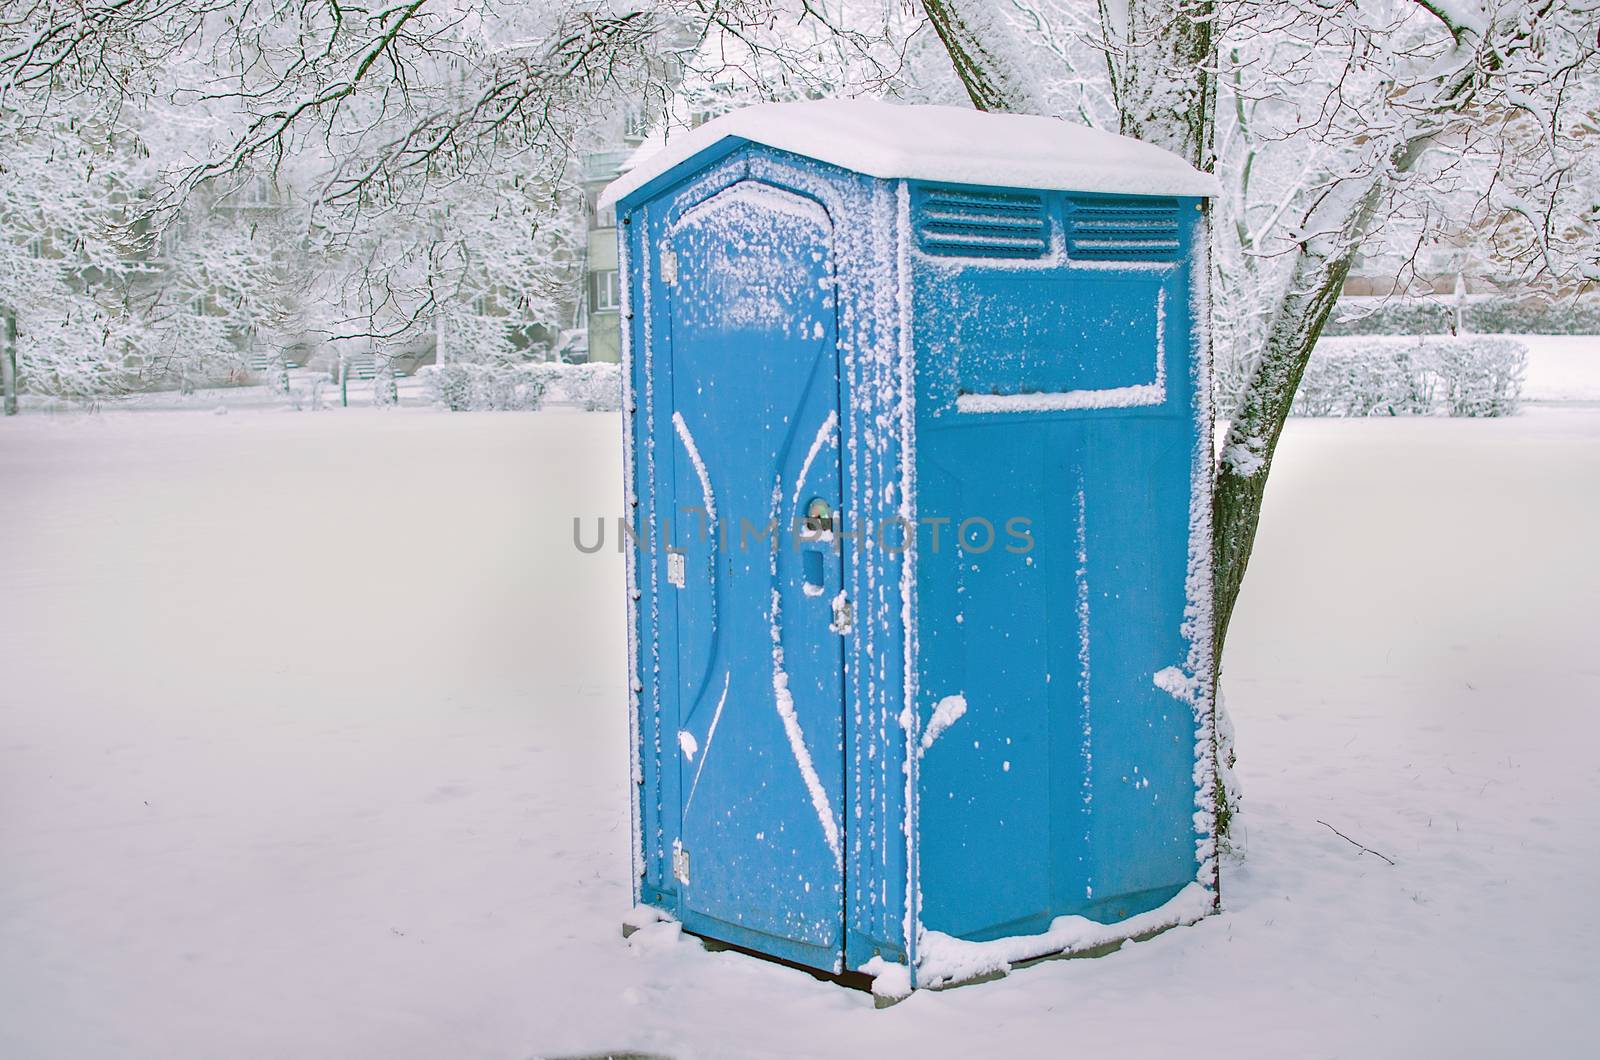 Snow covered blue cabine of bio toilets in the city center. WC. Public  plastic outdoor chemical  toilet in the park in winter time. Hiking services.